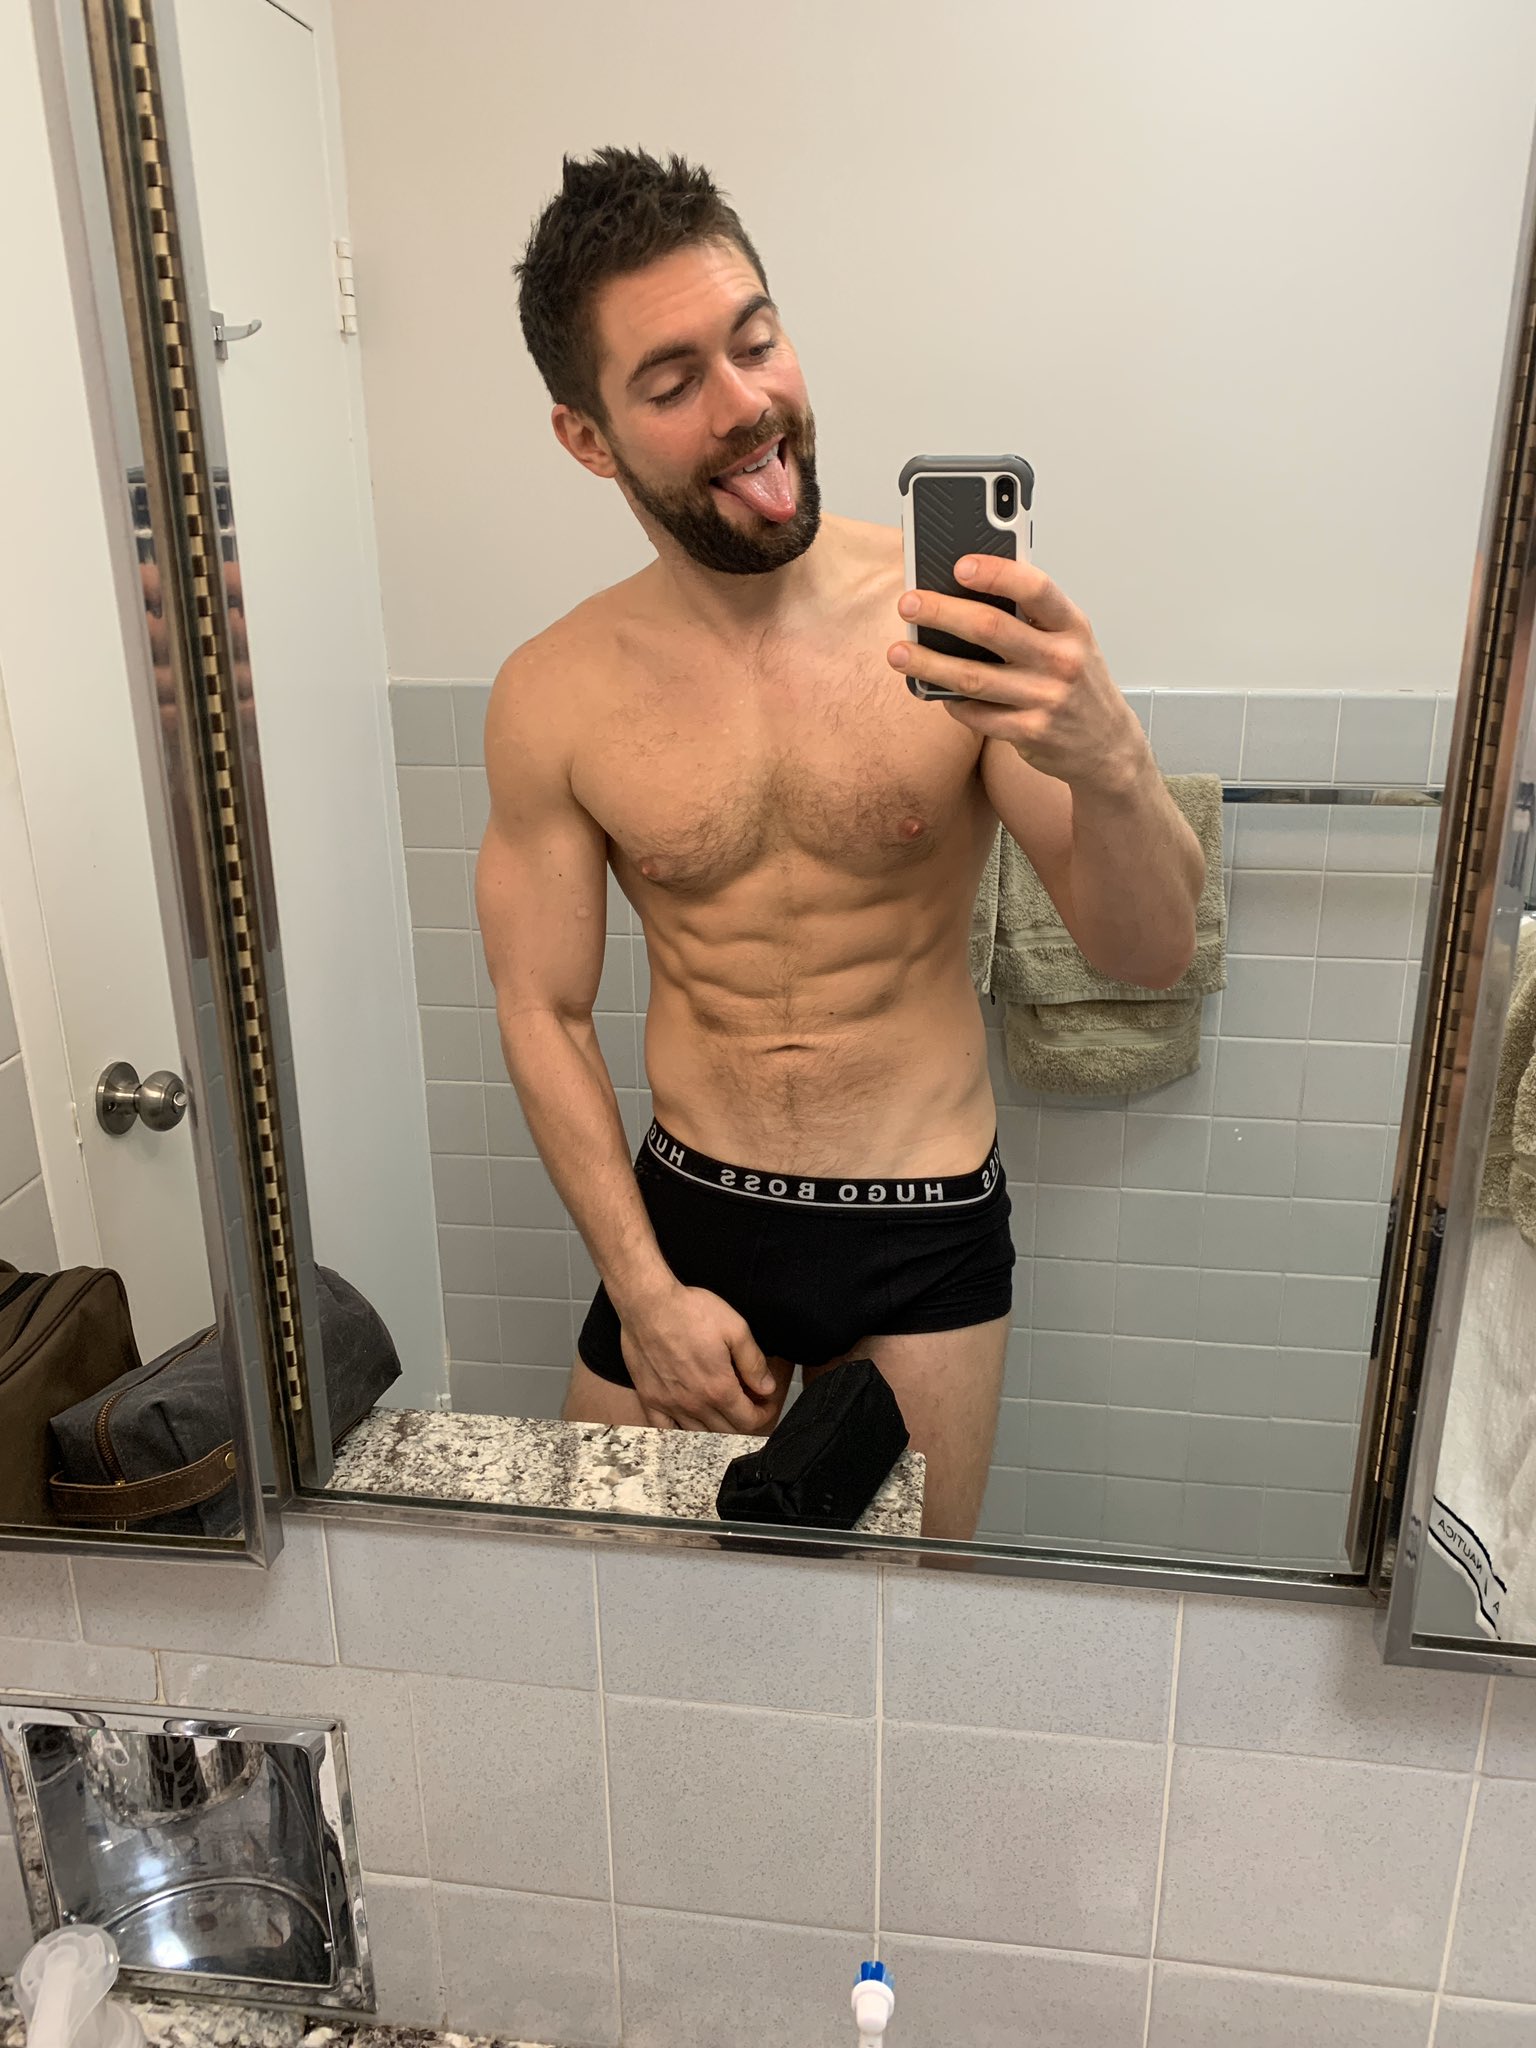 Griffin barrows onlyfans